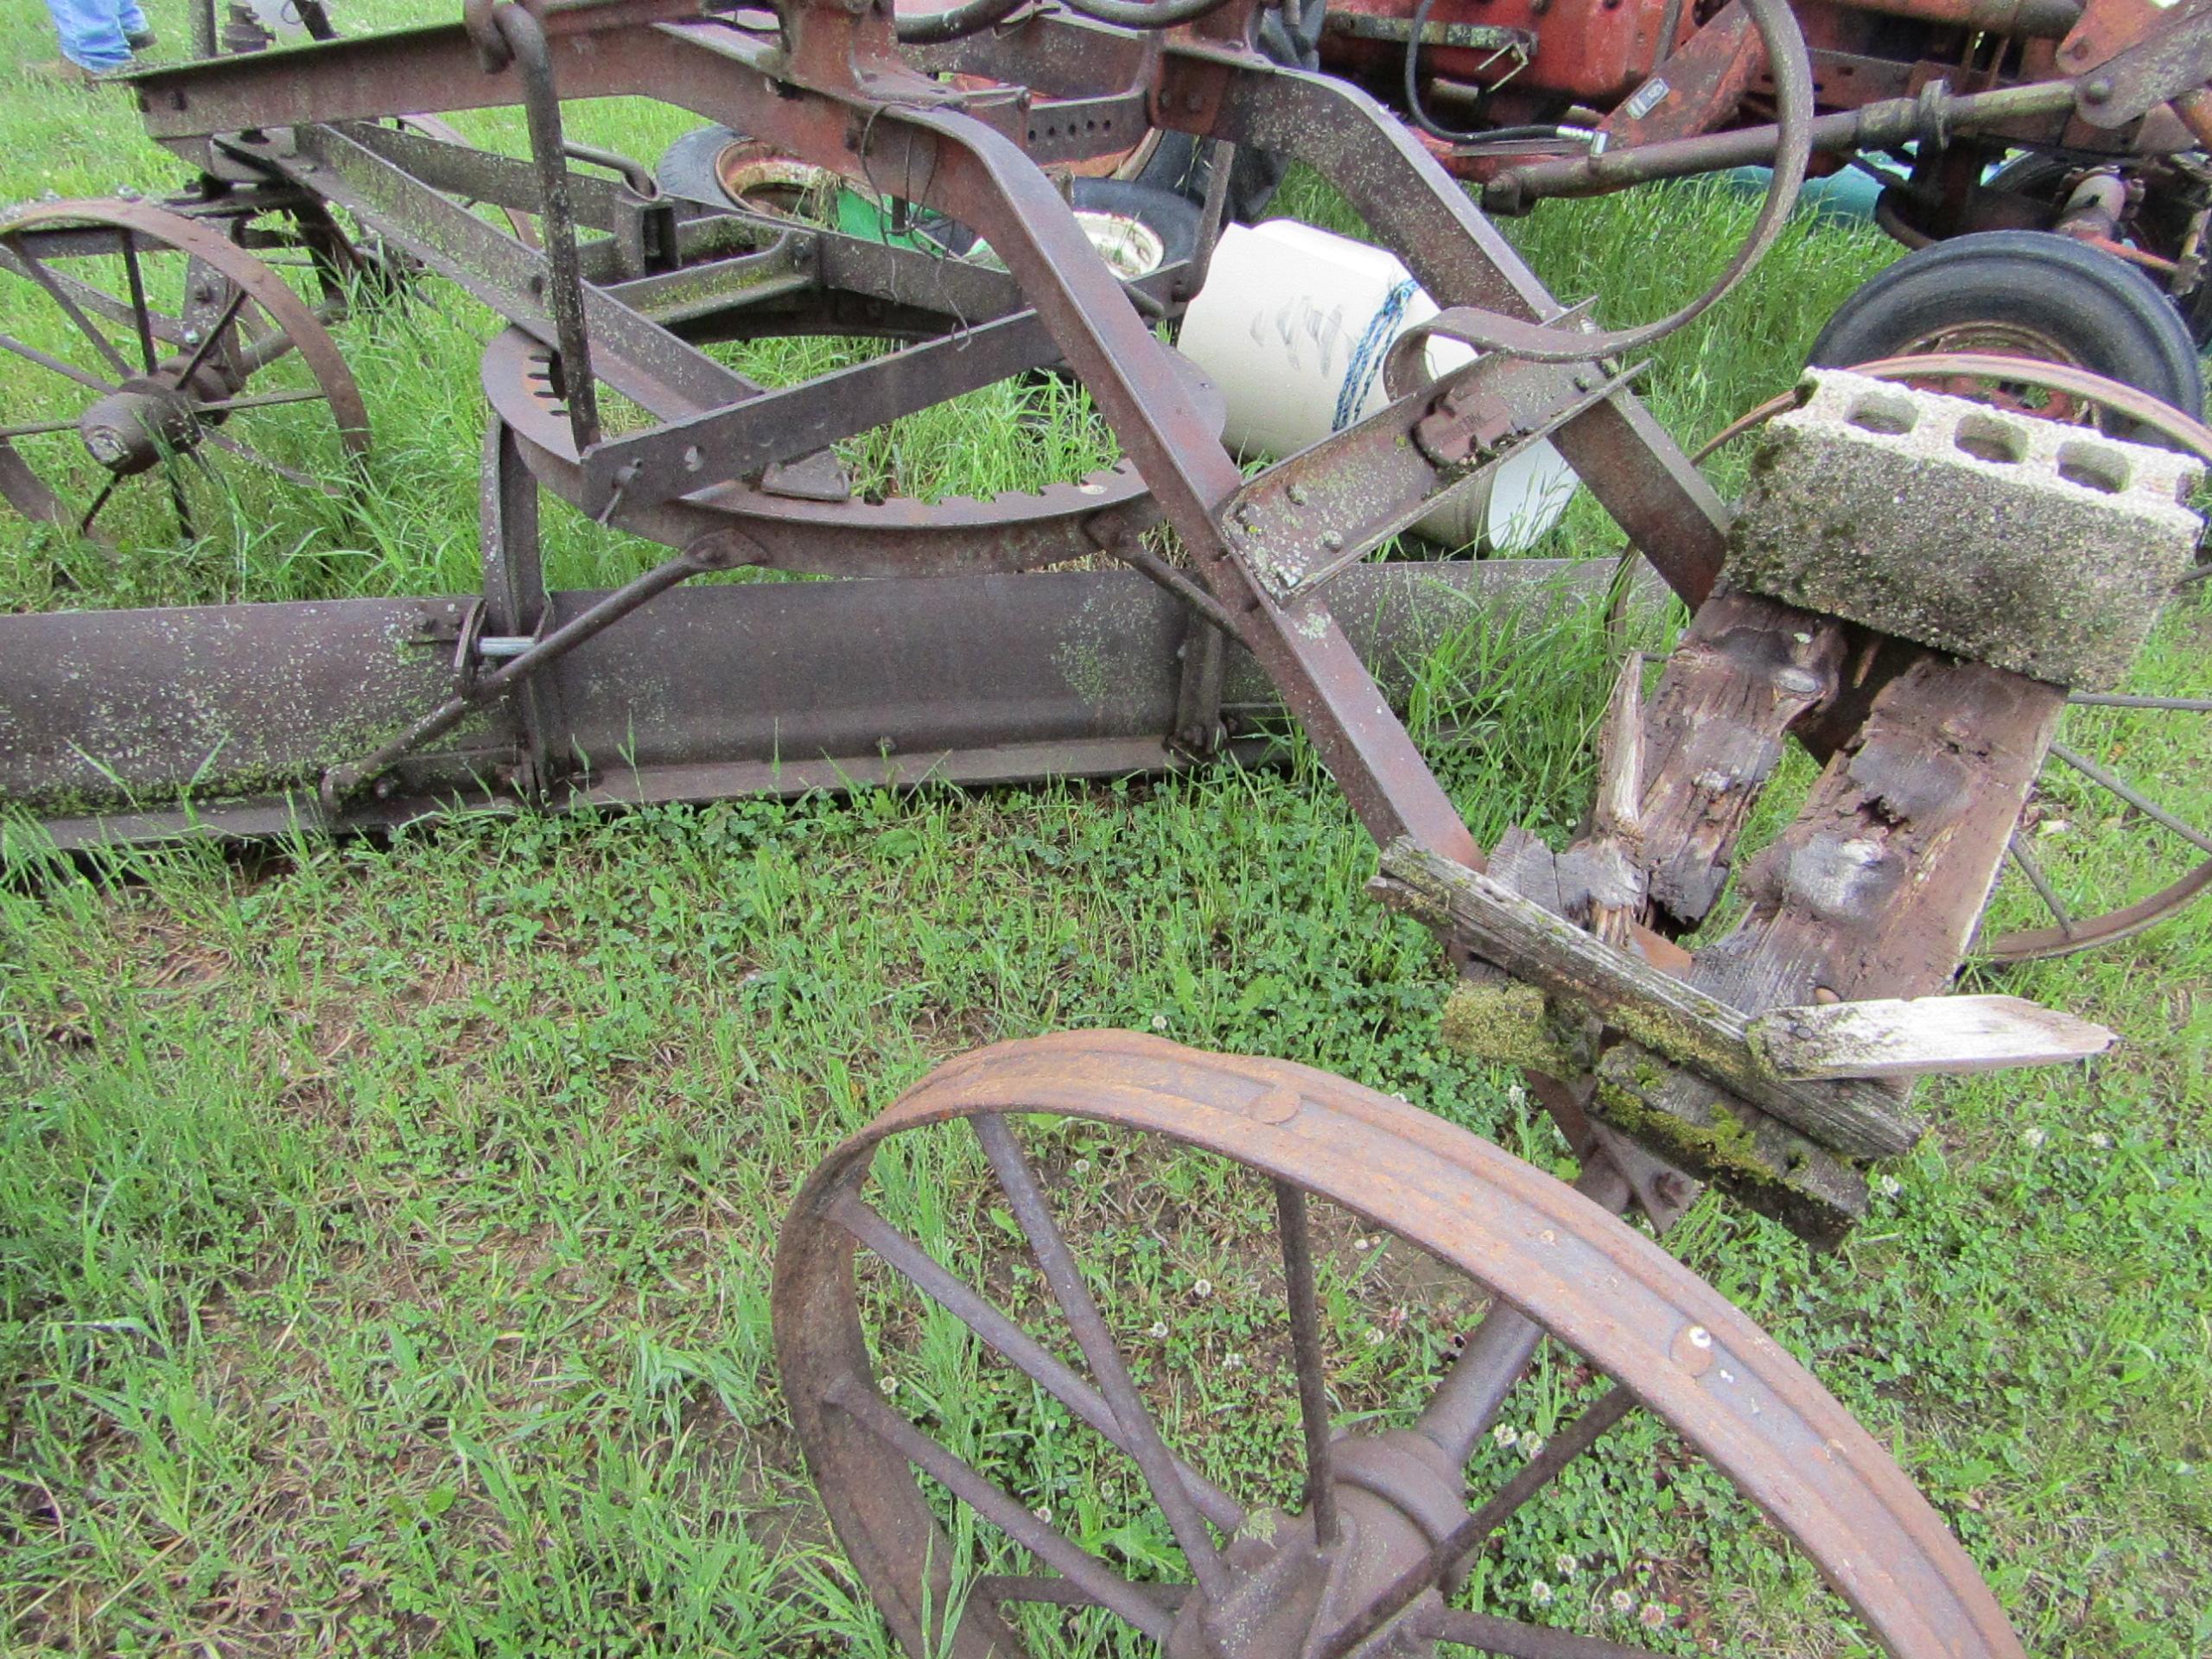 Good Township Style Pull Type Road Grader on Steel, Tractor Hitch